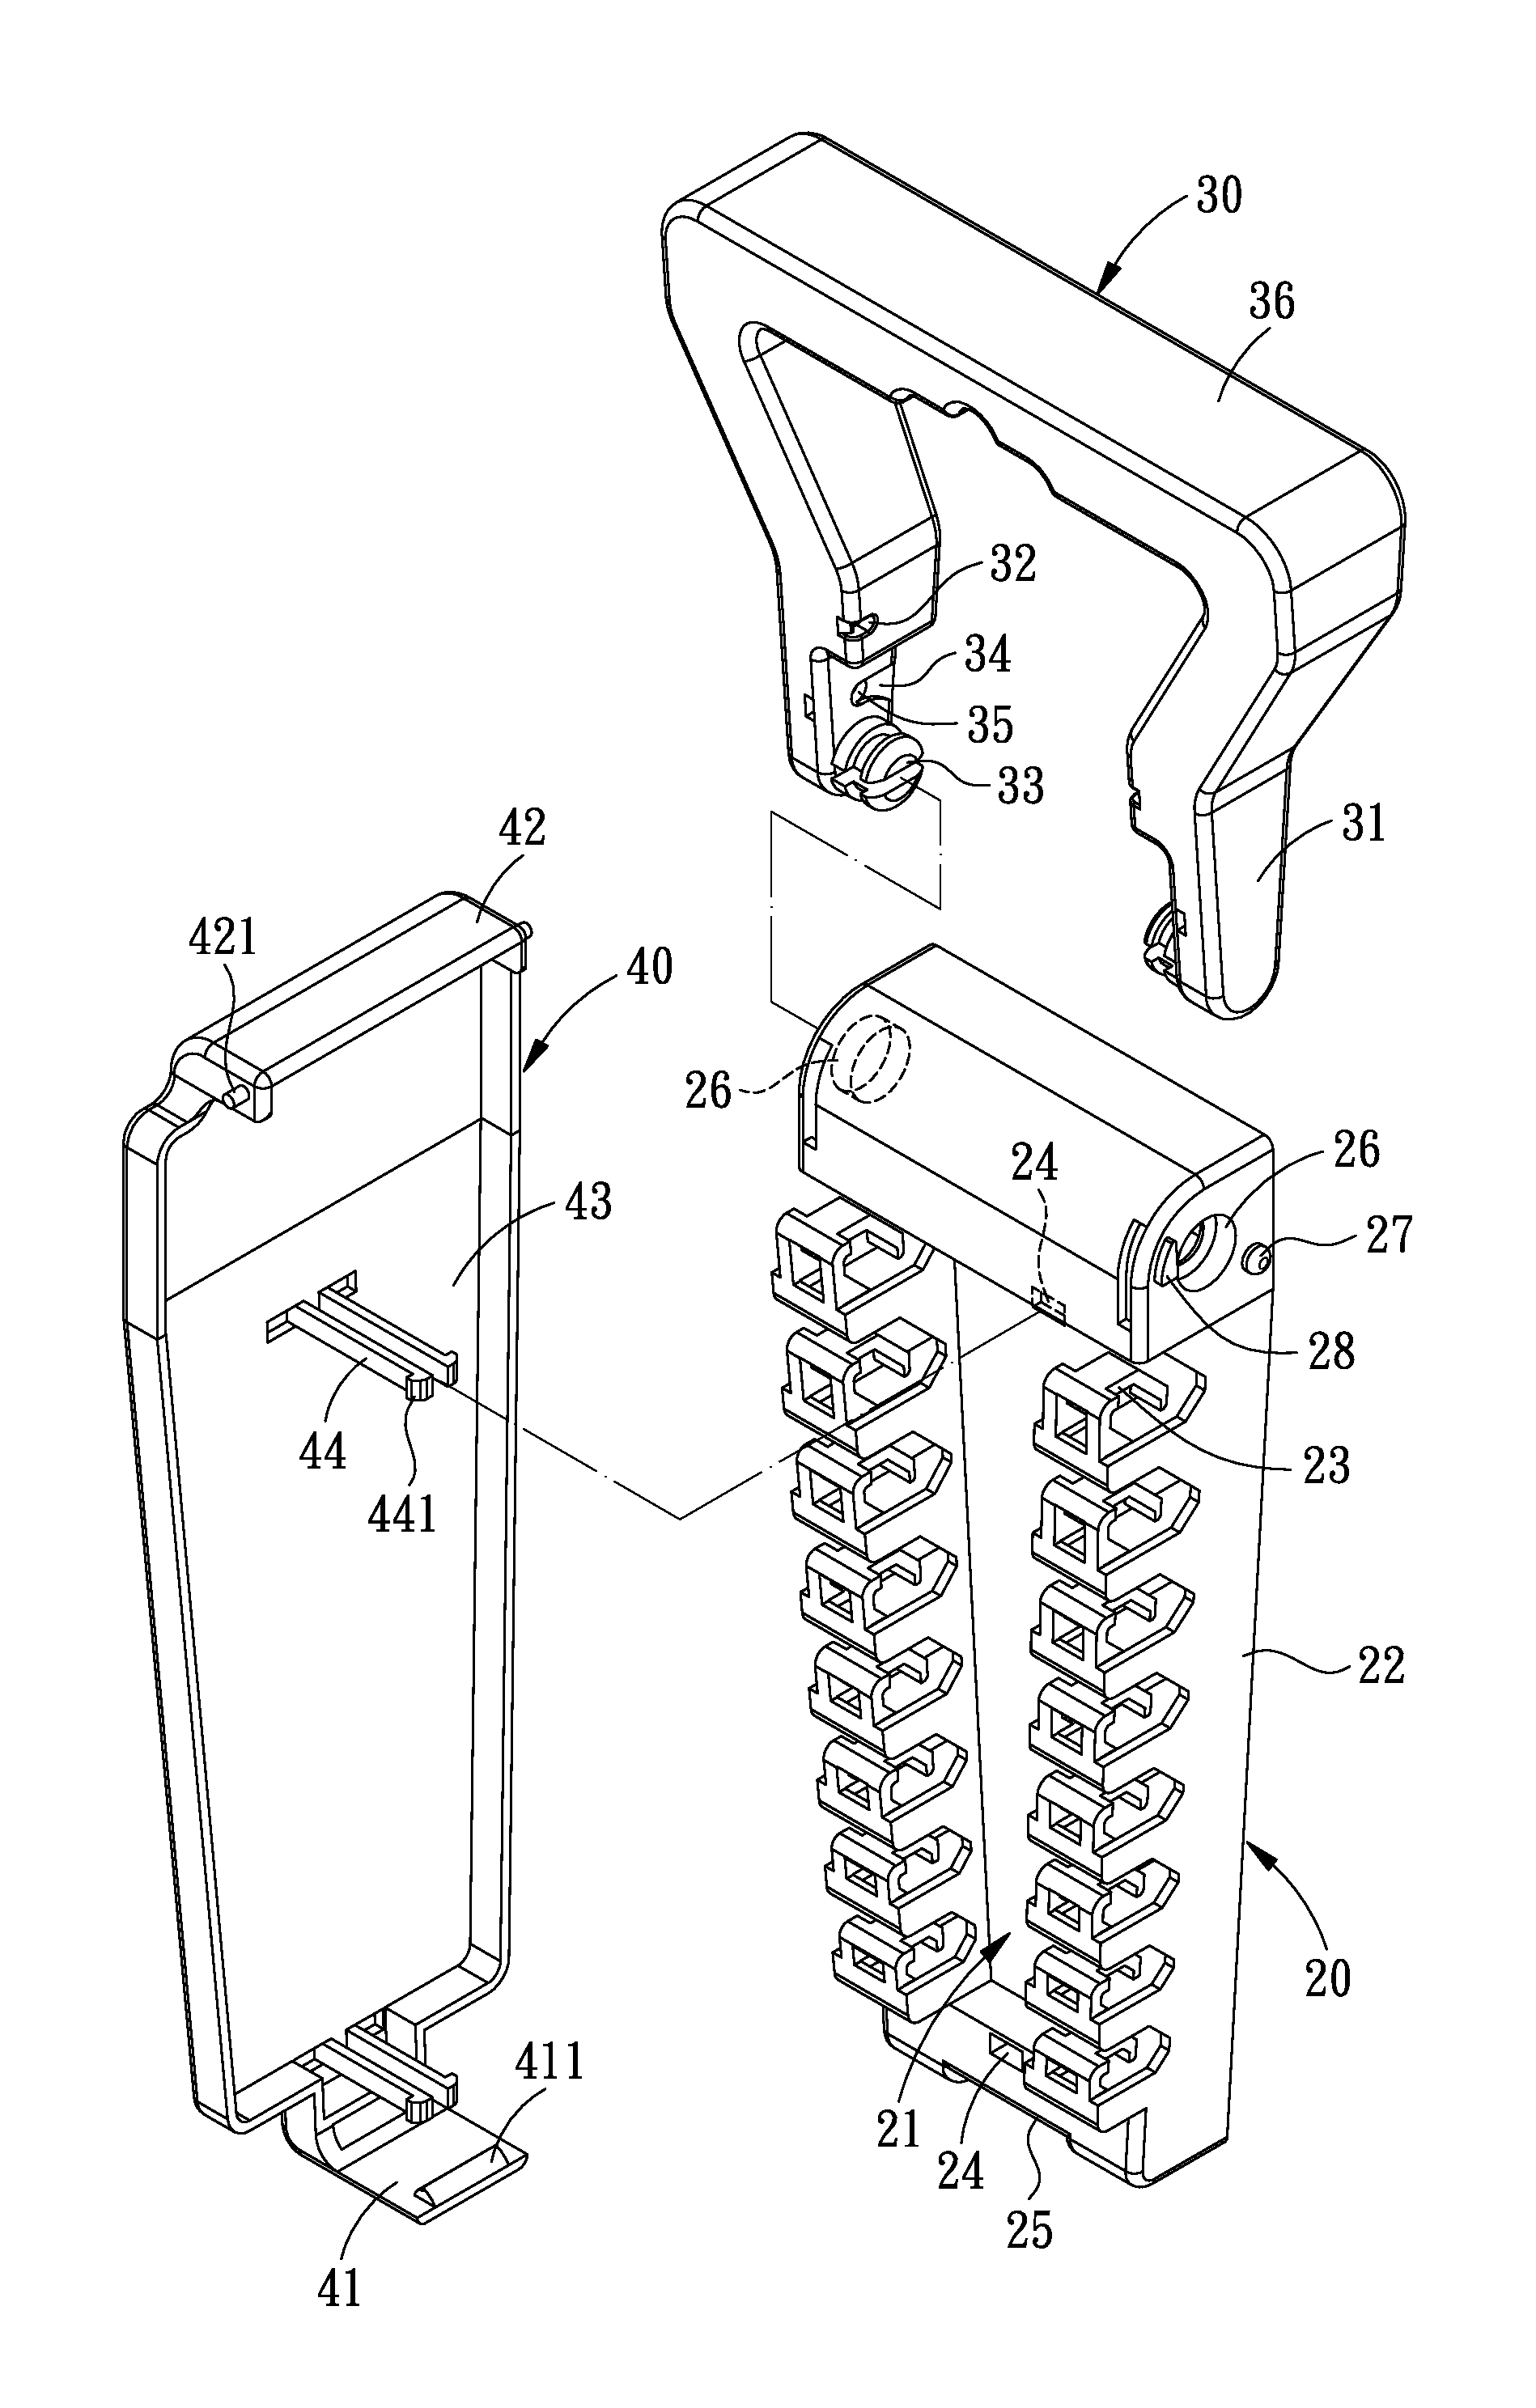 Locking structure for a tool box